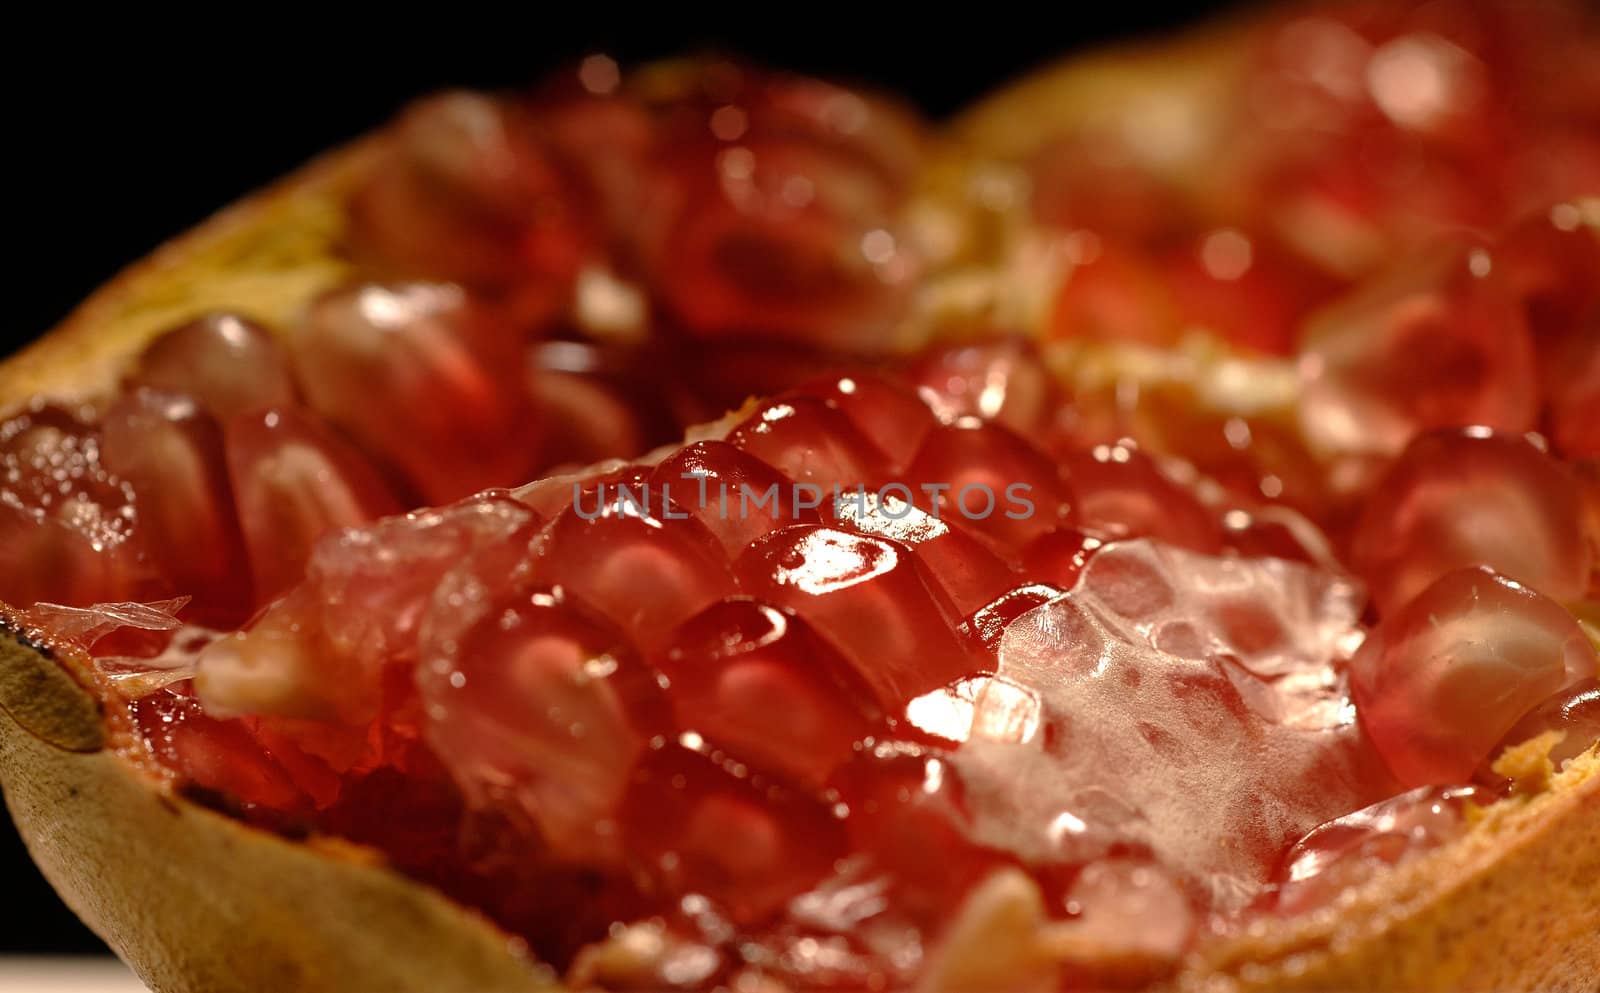 dettail close up of a pomegranate fruit open in half